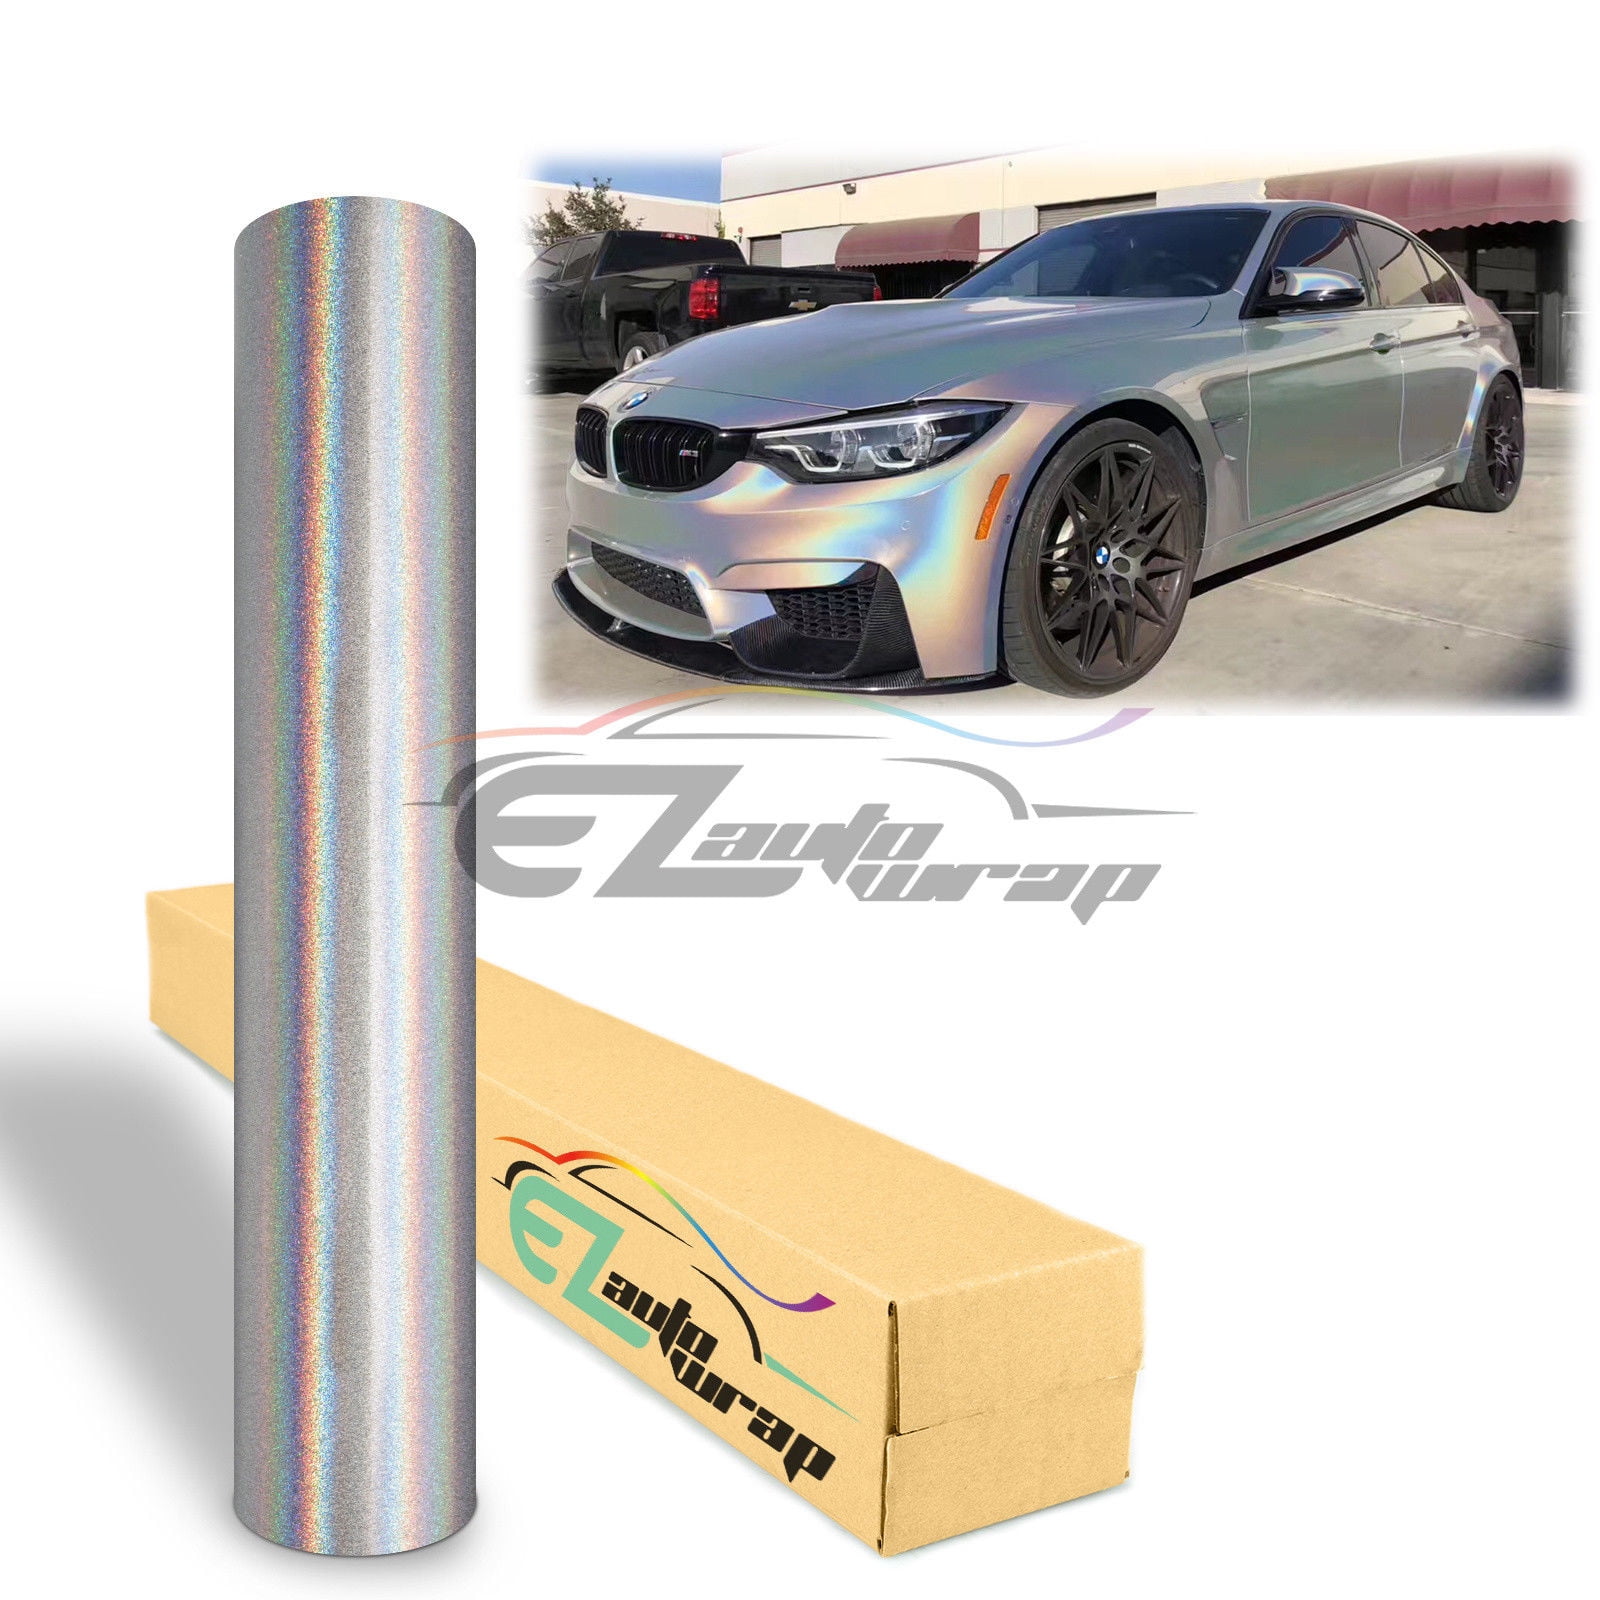 Glossy Silver Brushed Rainbow Vinyl Metal Car Wrap Film Styling Adhesive Sticker 